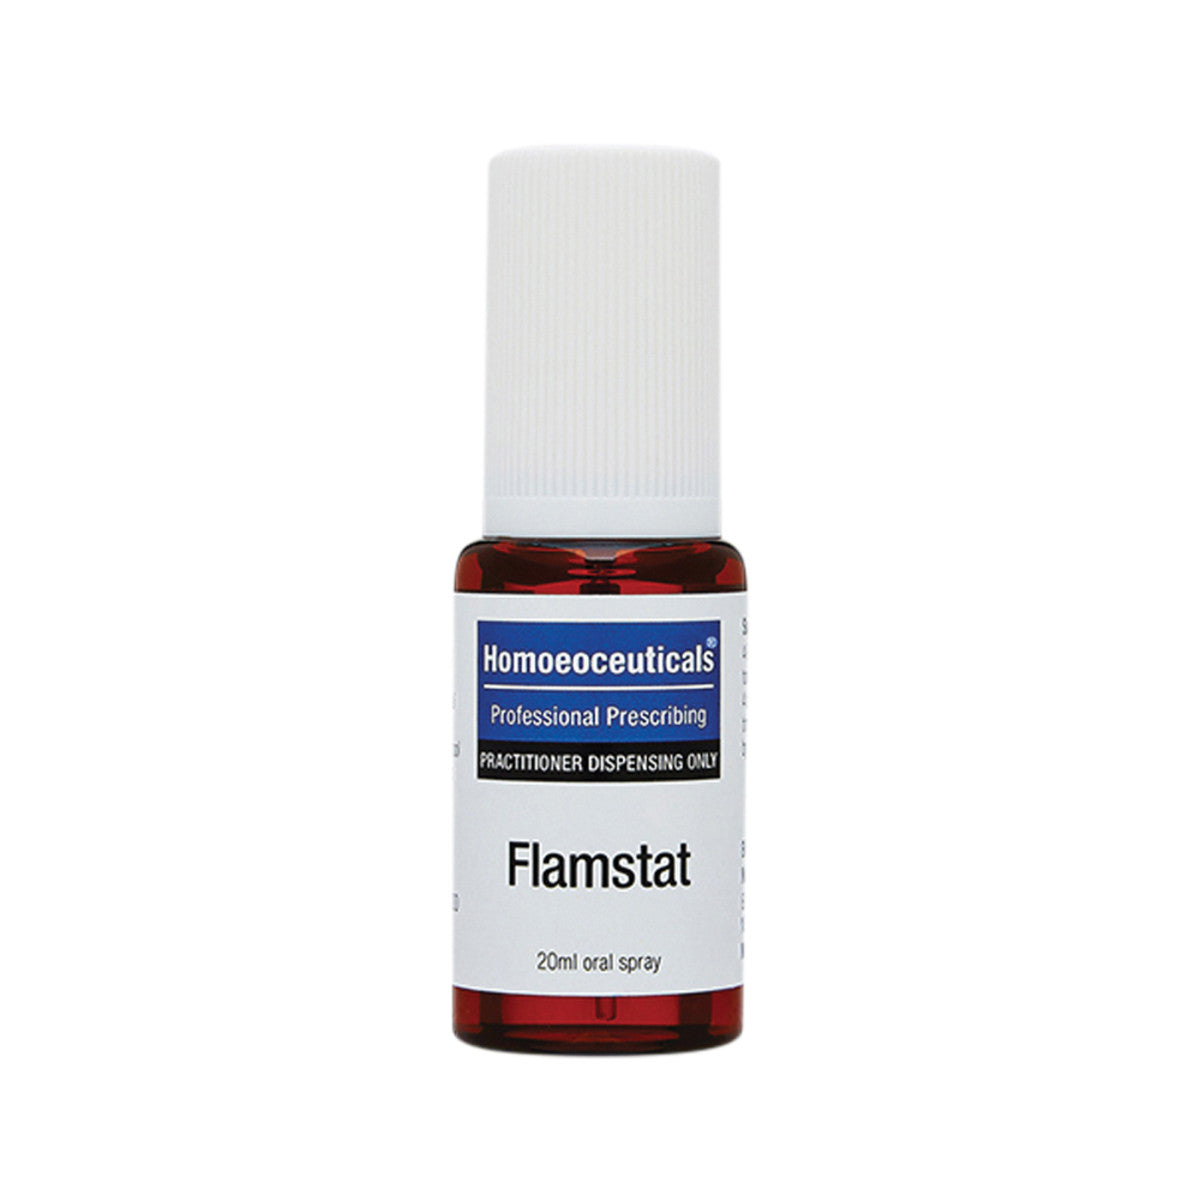 Homoeoceuticals - Flamstat Spray